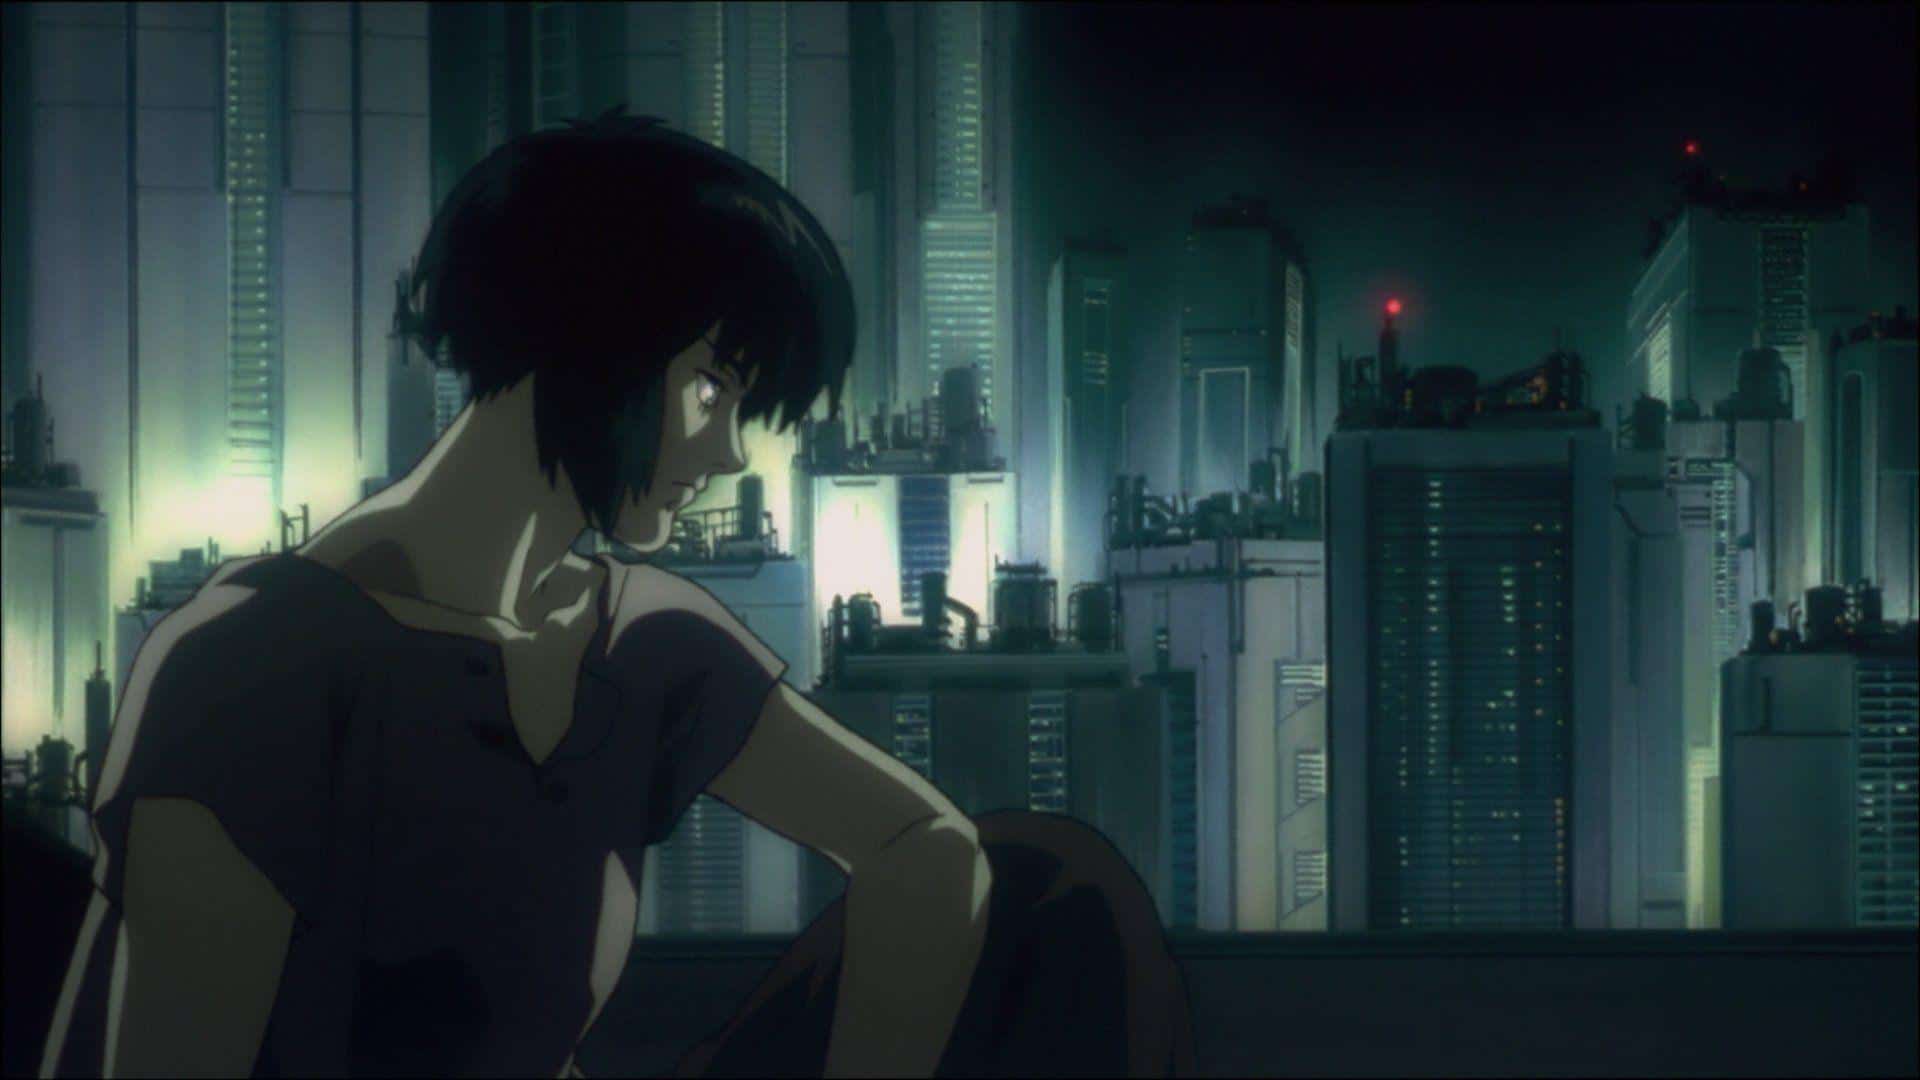 Ghost in a Shell's Motoko